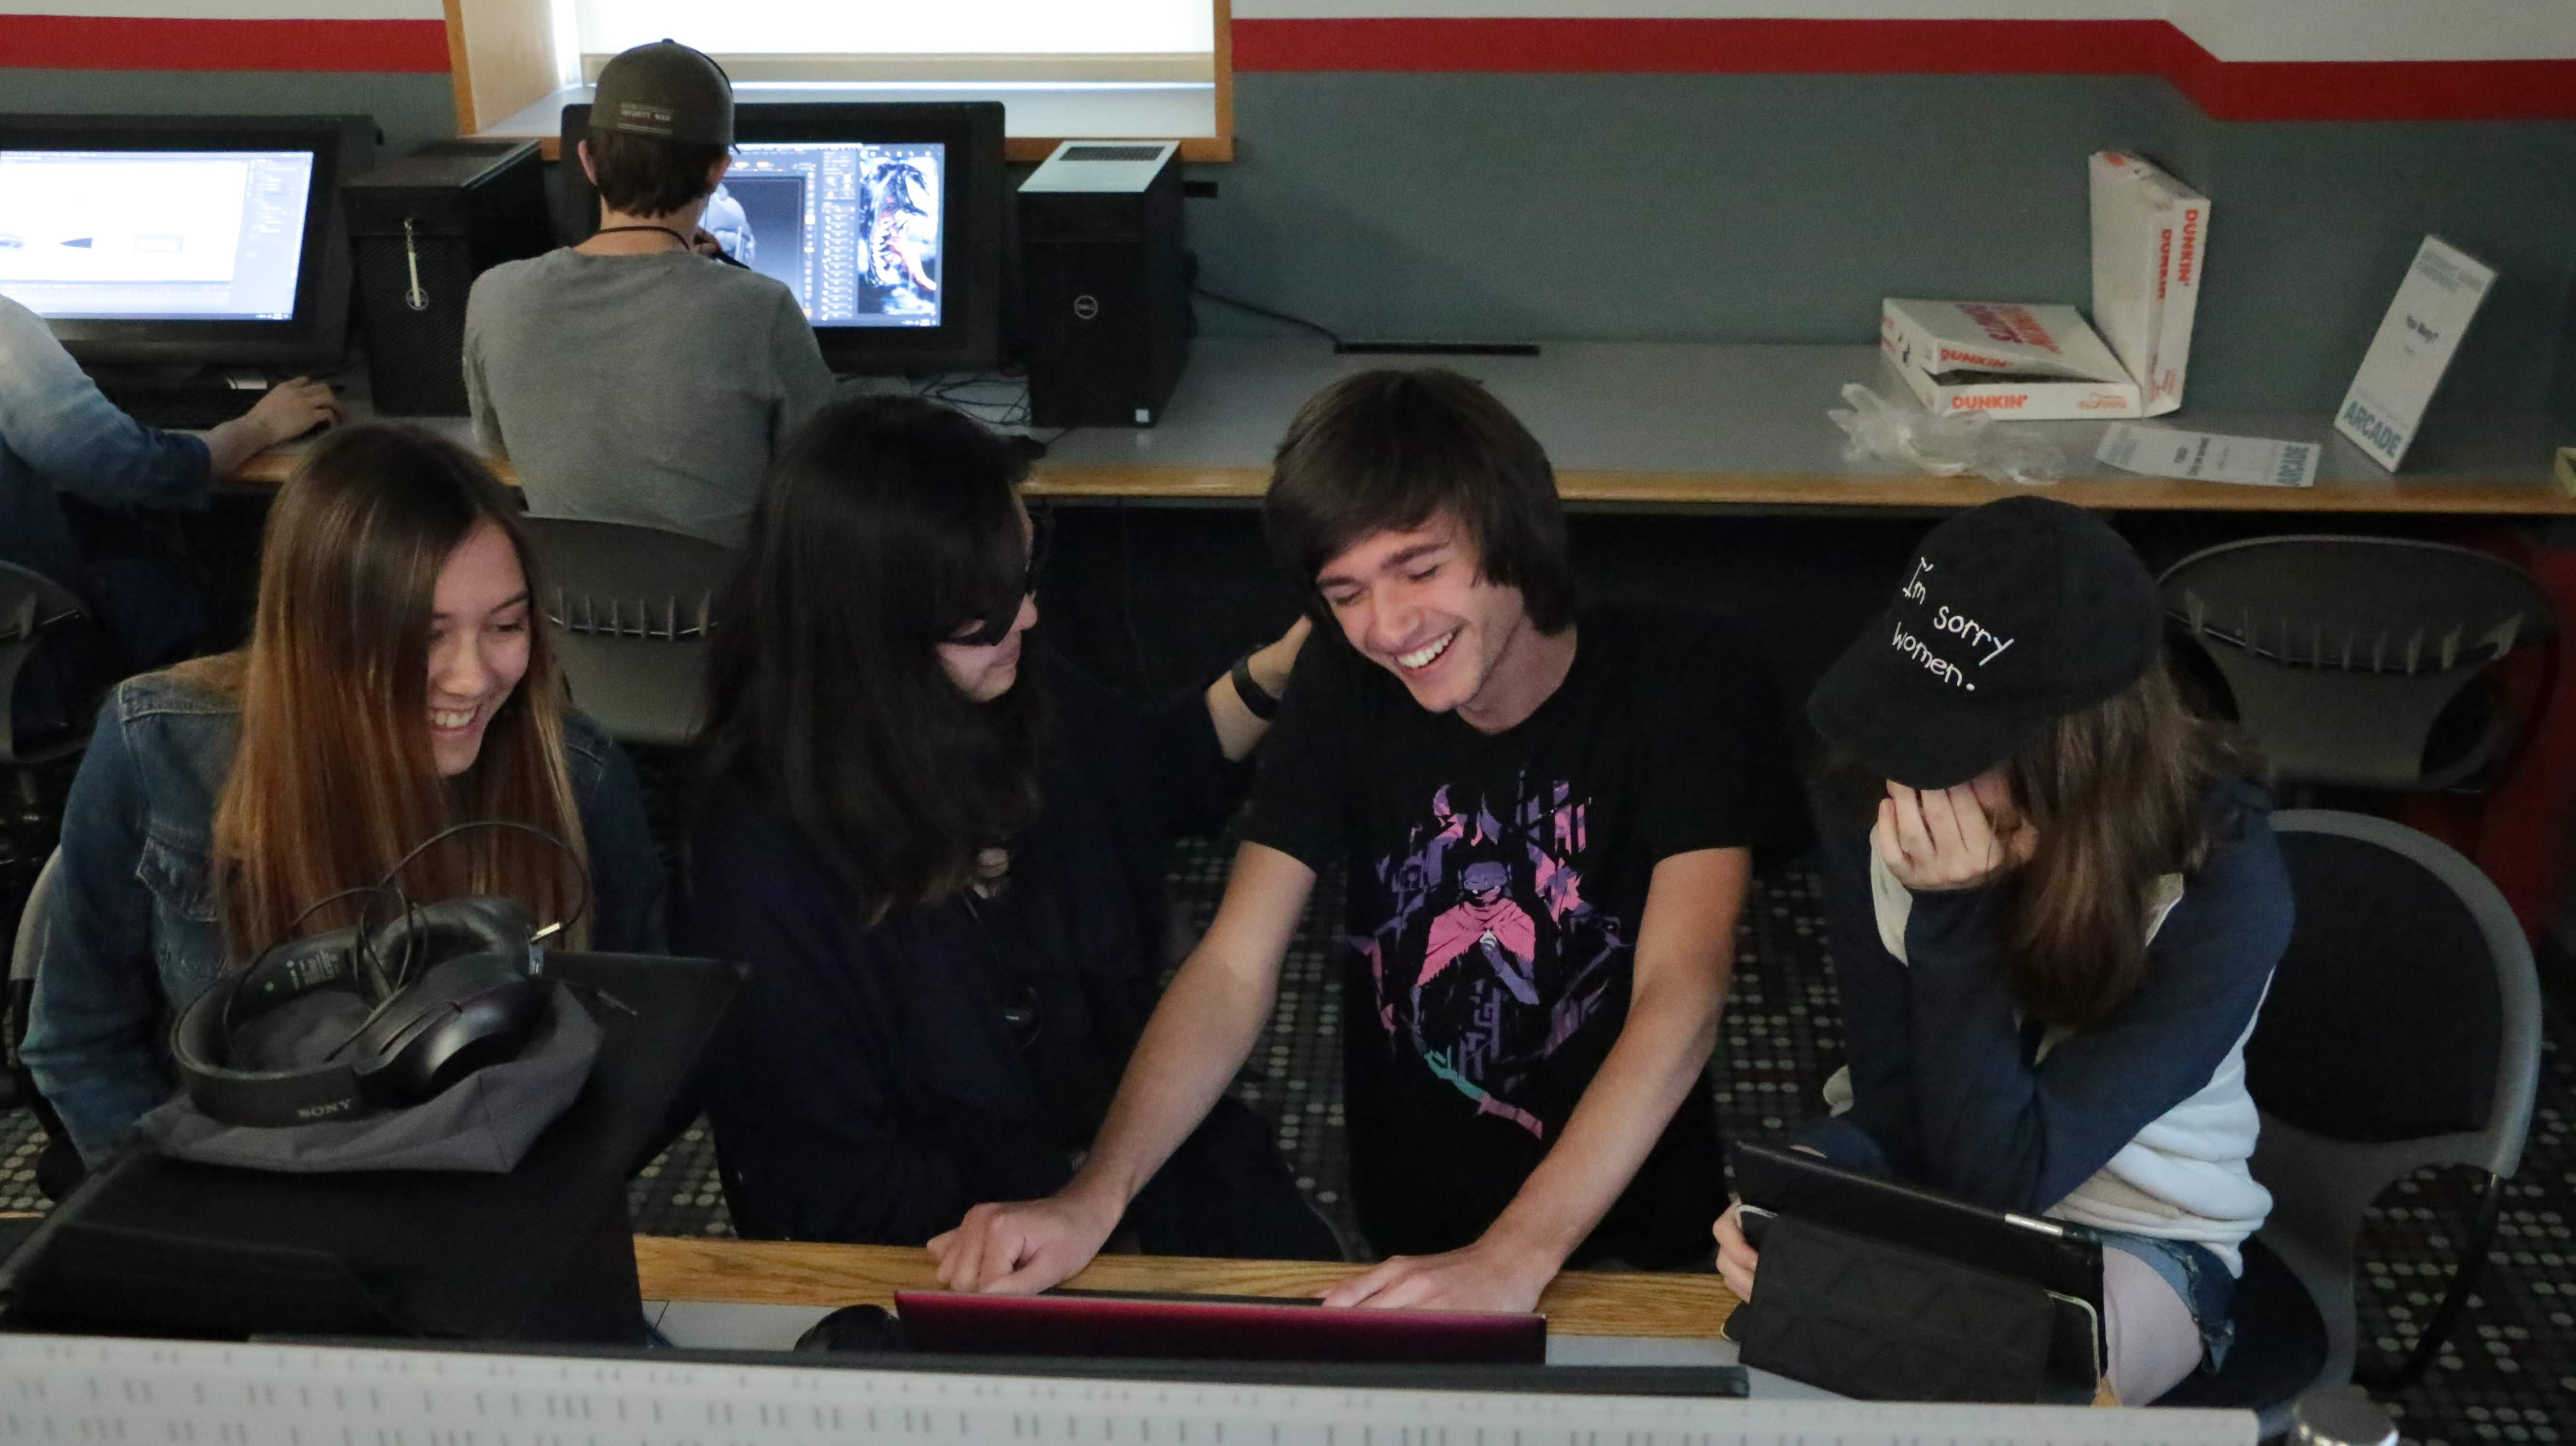 IMGD students gathered around a computer in a Fuller lab